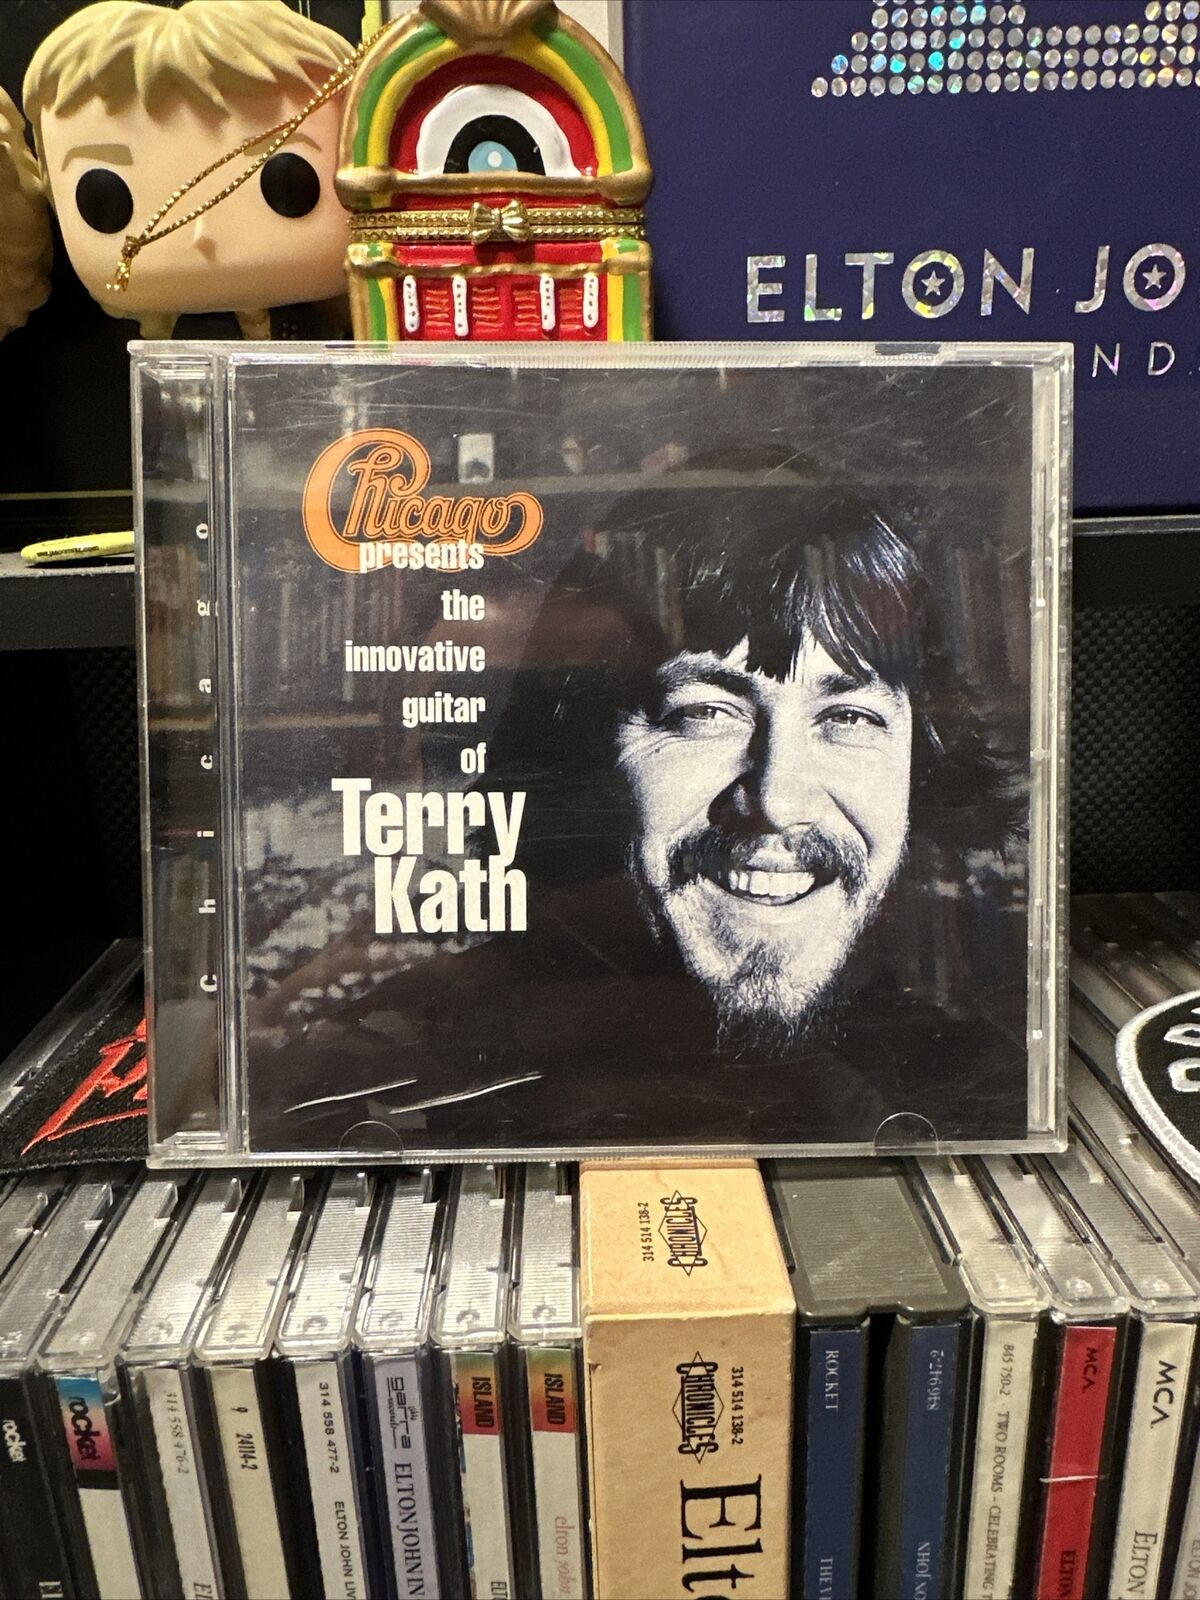 Chicago Presents The Innovative Guitar of Terry Kath CD Very Rare OOP